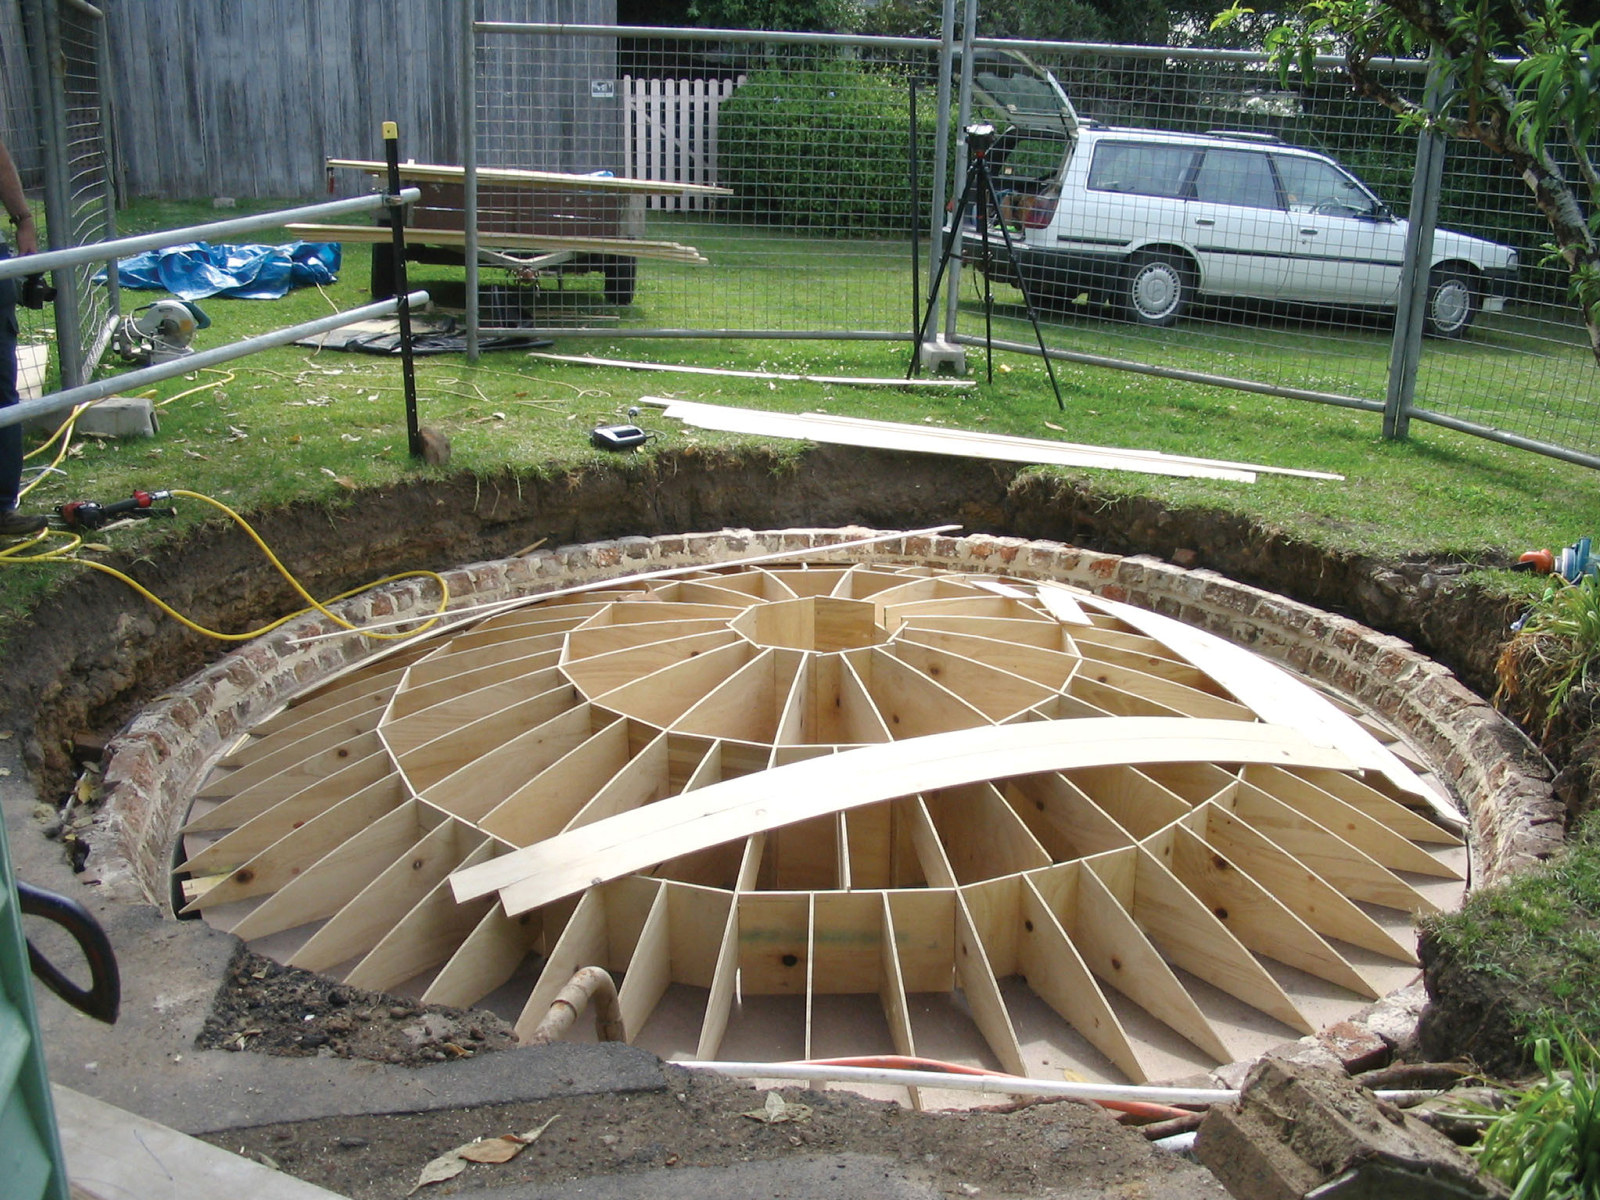 Underground brick water tank or cistern with domed roof being demolished and reconstructed.